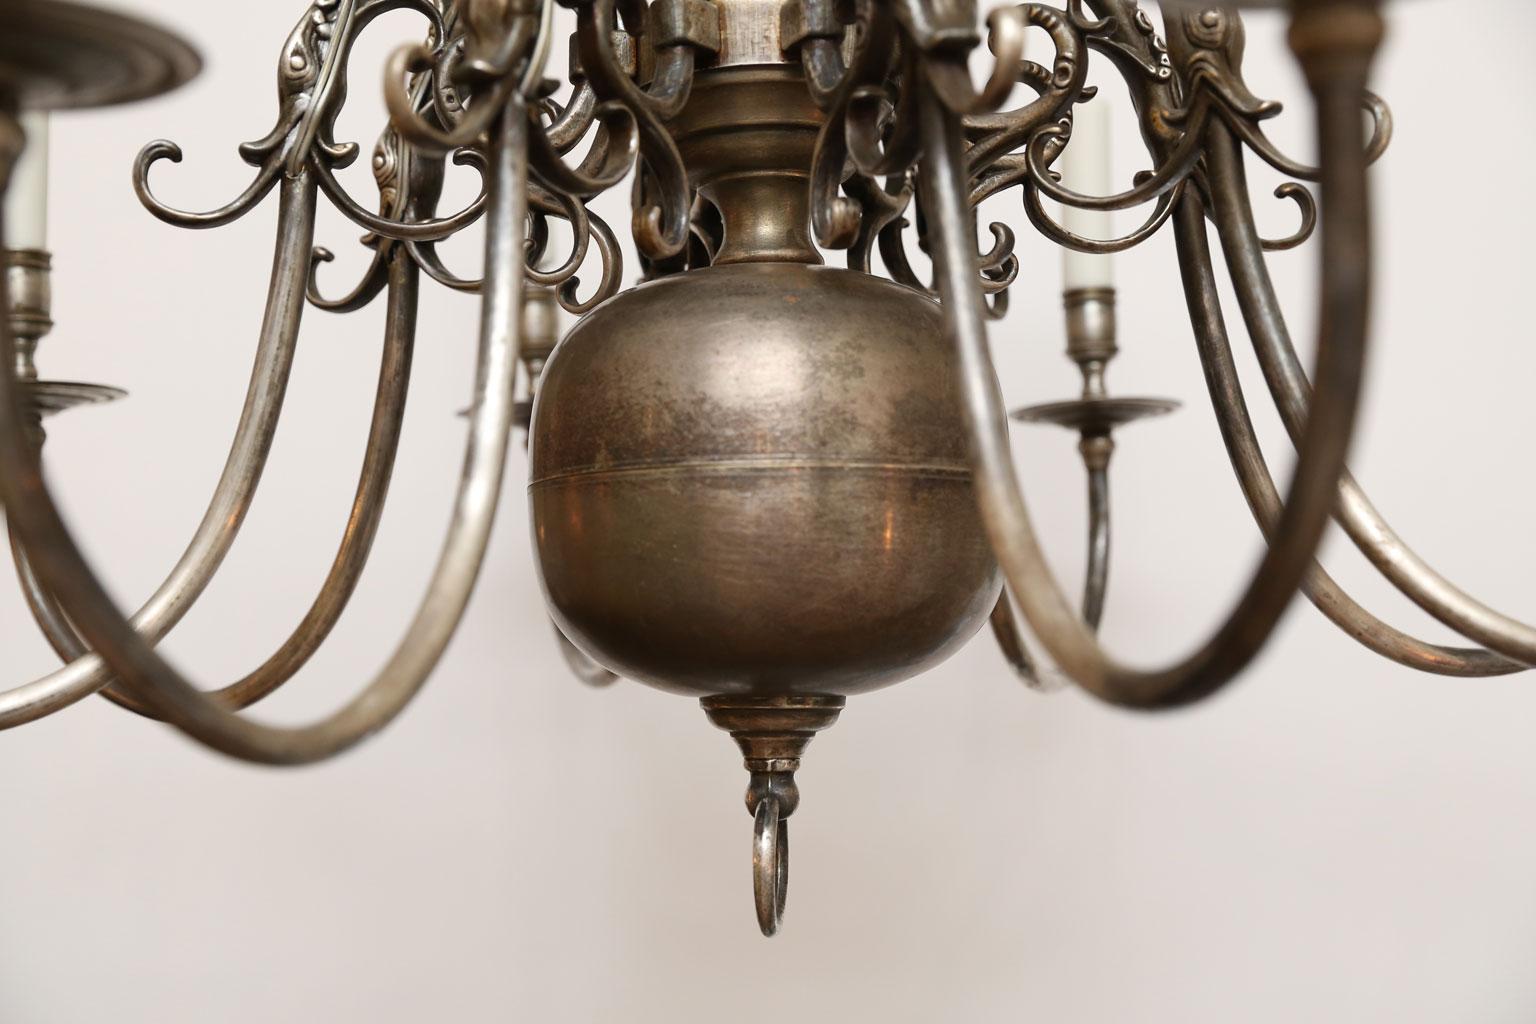 Nickel on bronze Georgian style chandelier (circa 1940s) with eight arms each. Candelabra-size sockets and newly wired for use within the USA. Wonderful color and natural patina. Includes chain and canopies. They are heavy and of interesting color.